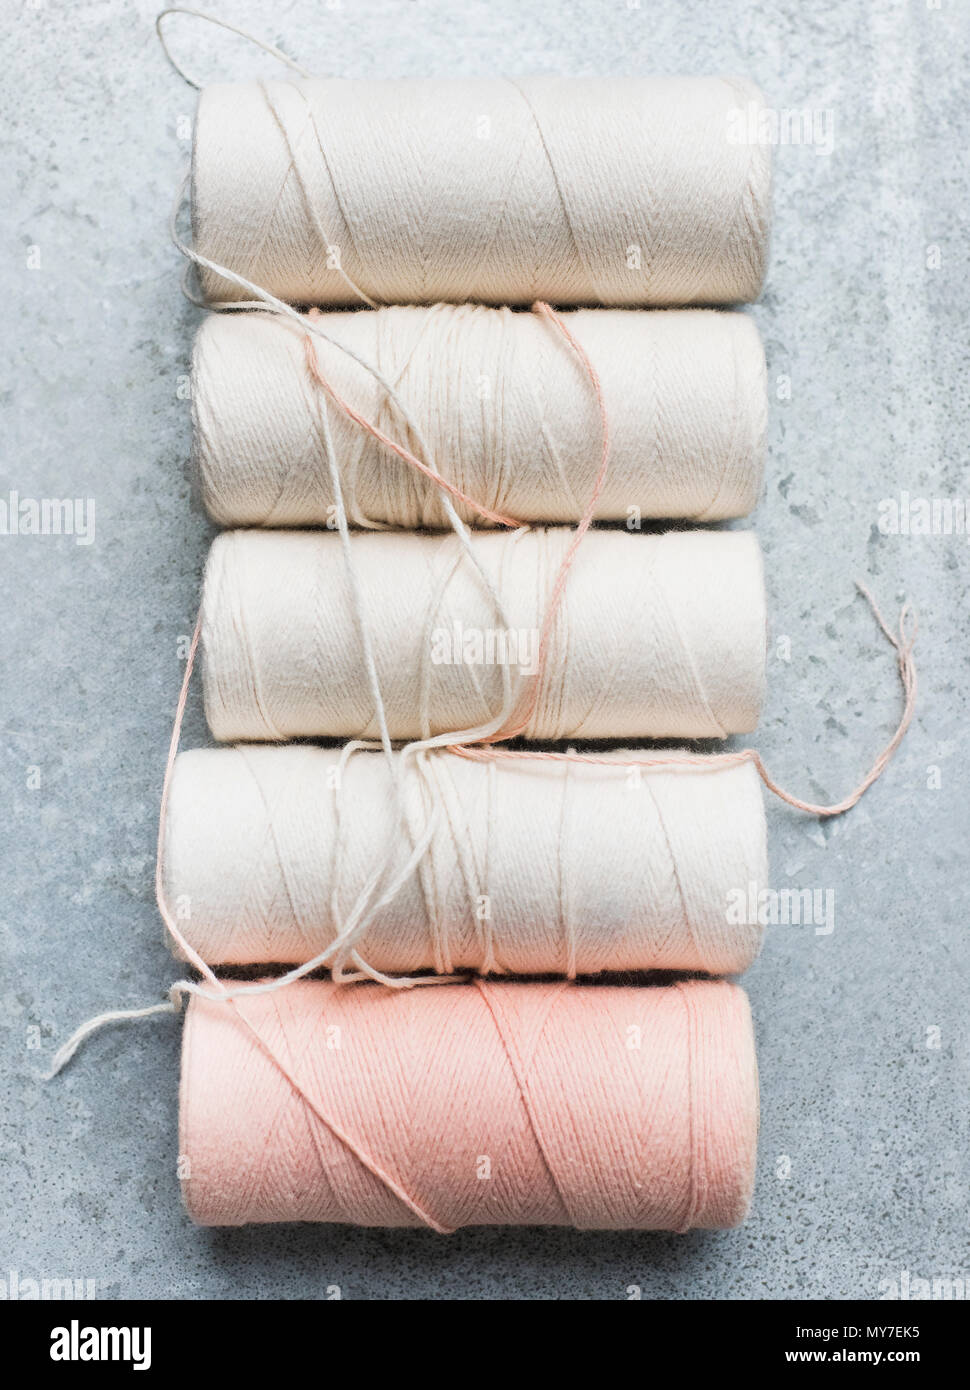 Still life with row of yarn spools, overhead view Stock Photo